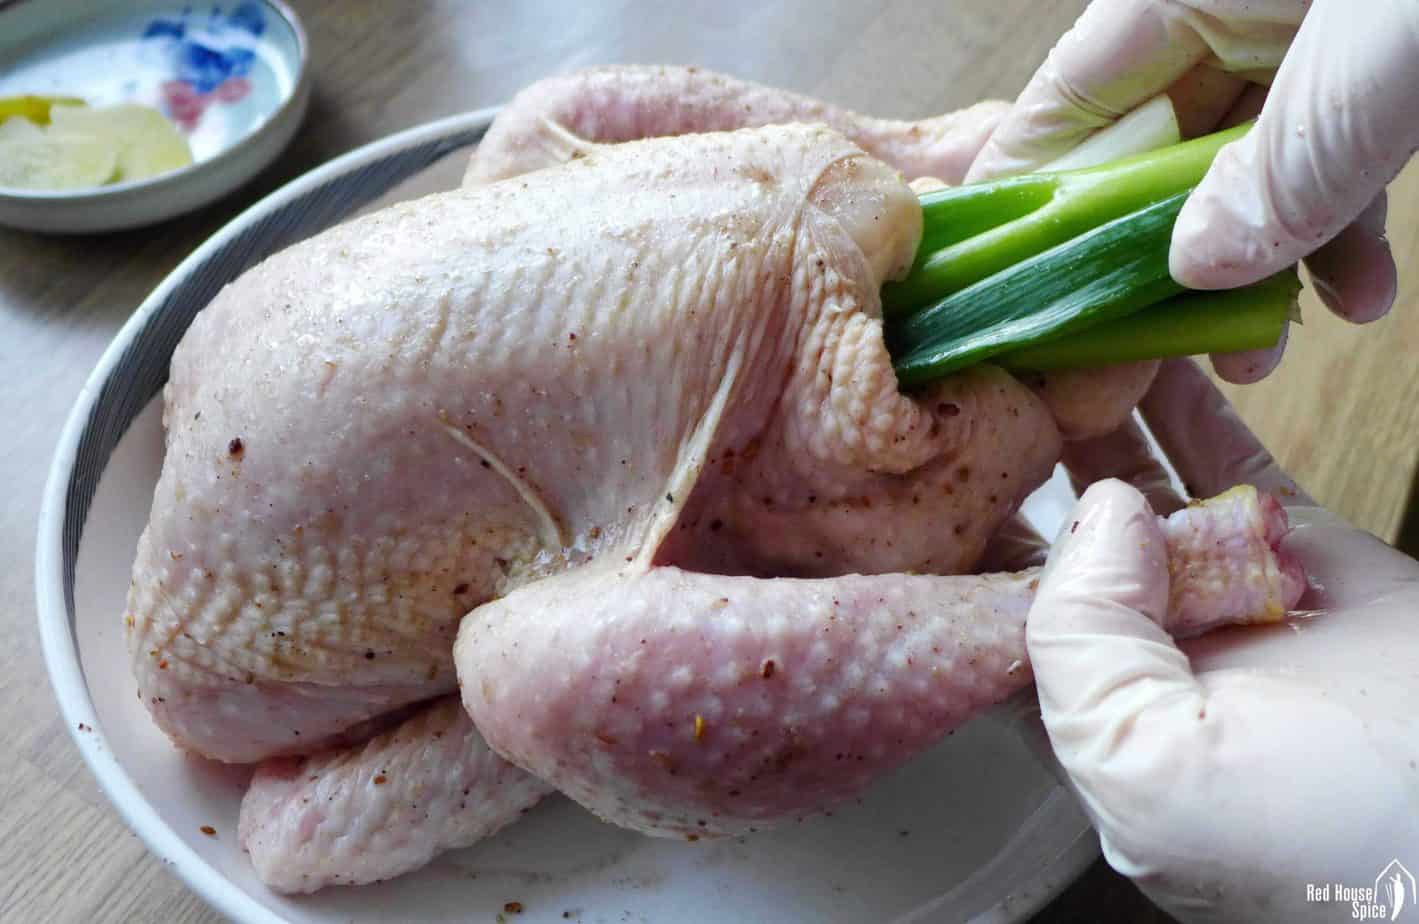 Putting scallions into the cavity of a chicken